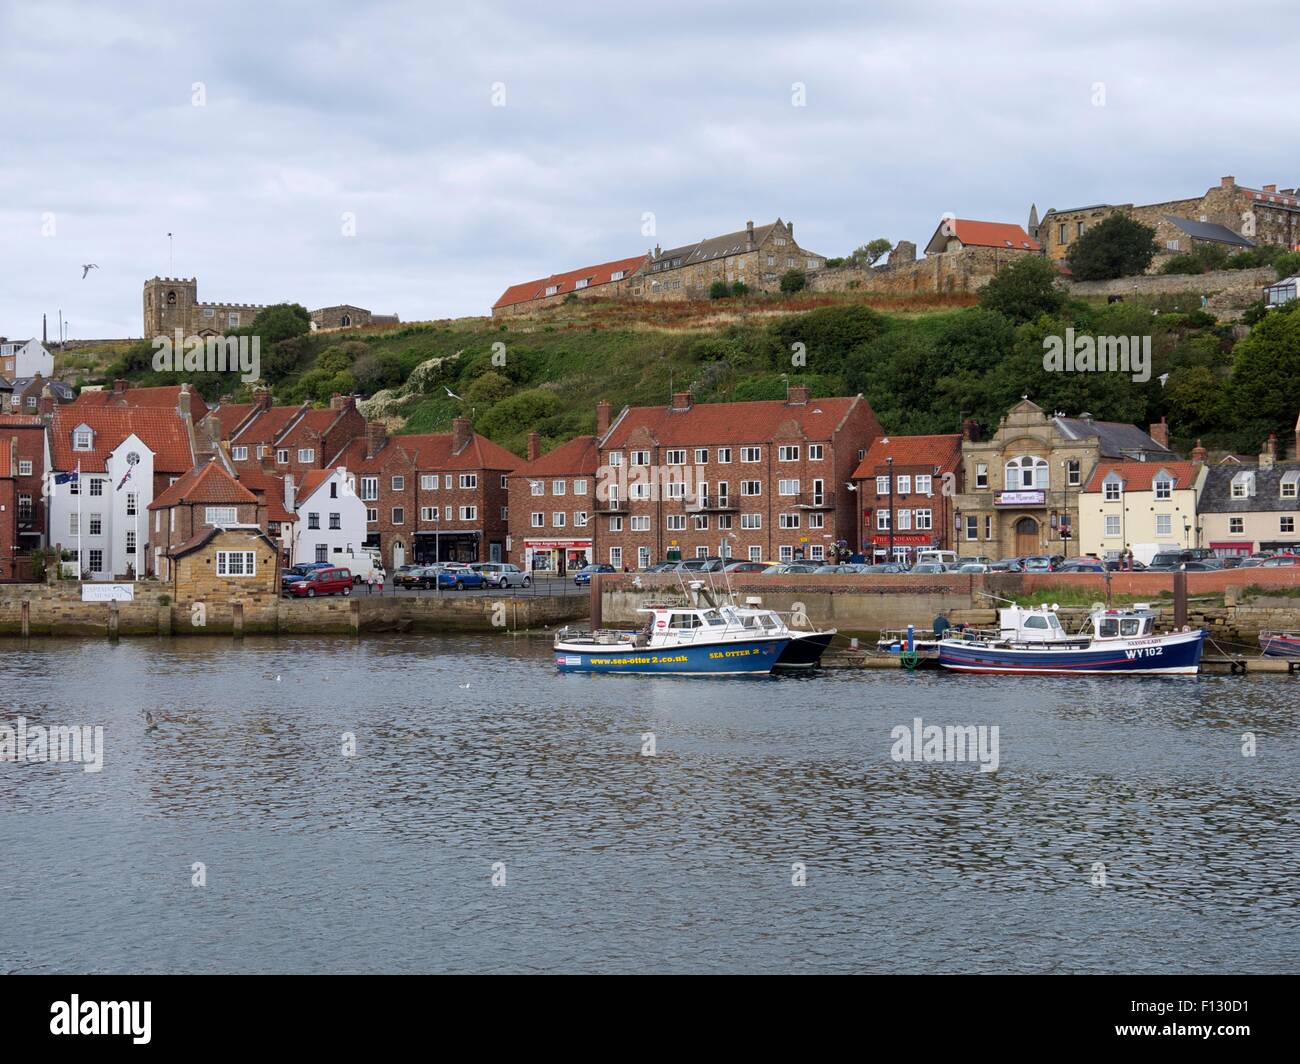 Fishing boats moored up in the harbor with houses and a church on the hill in the background Stock Photo